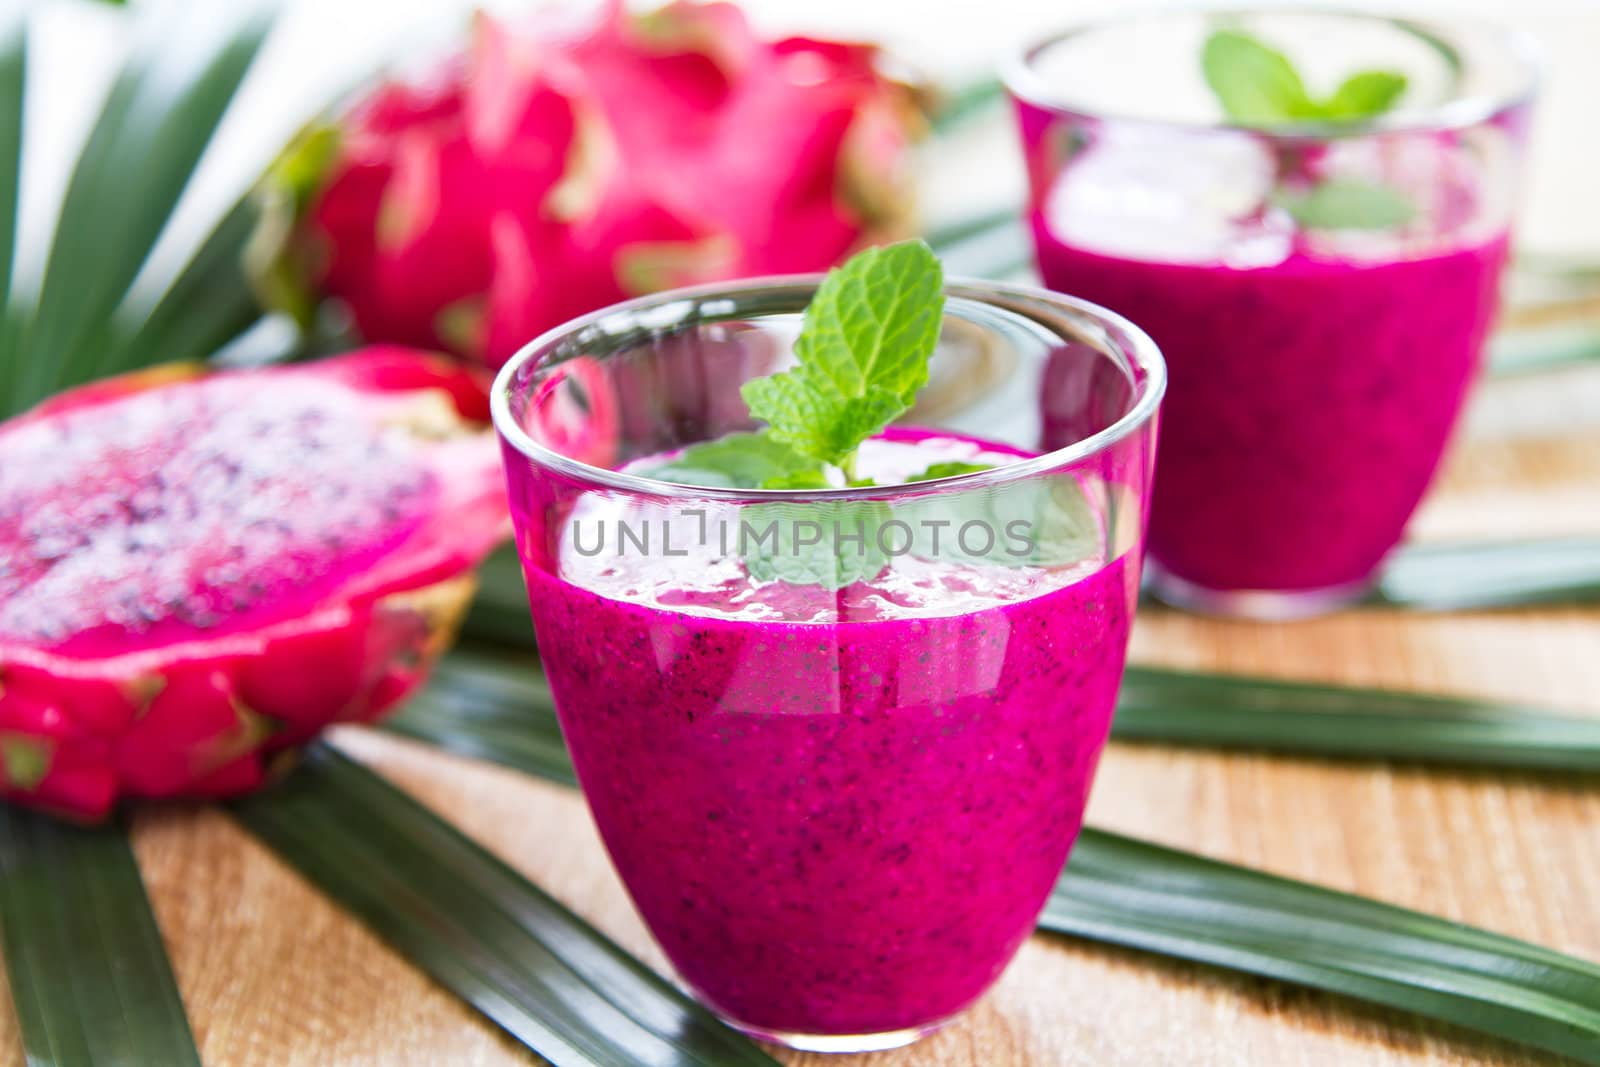 Dragon fruit smoothie by vanillaechoes